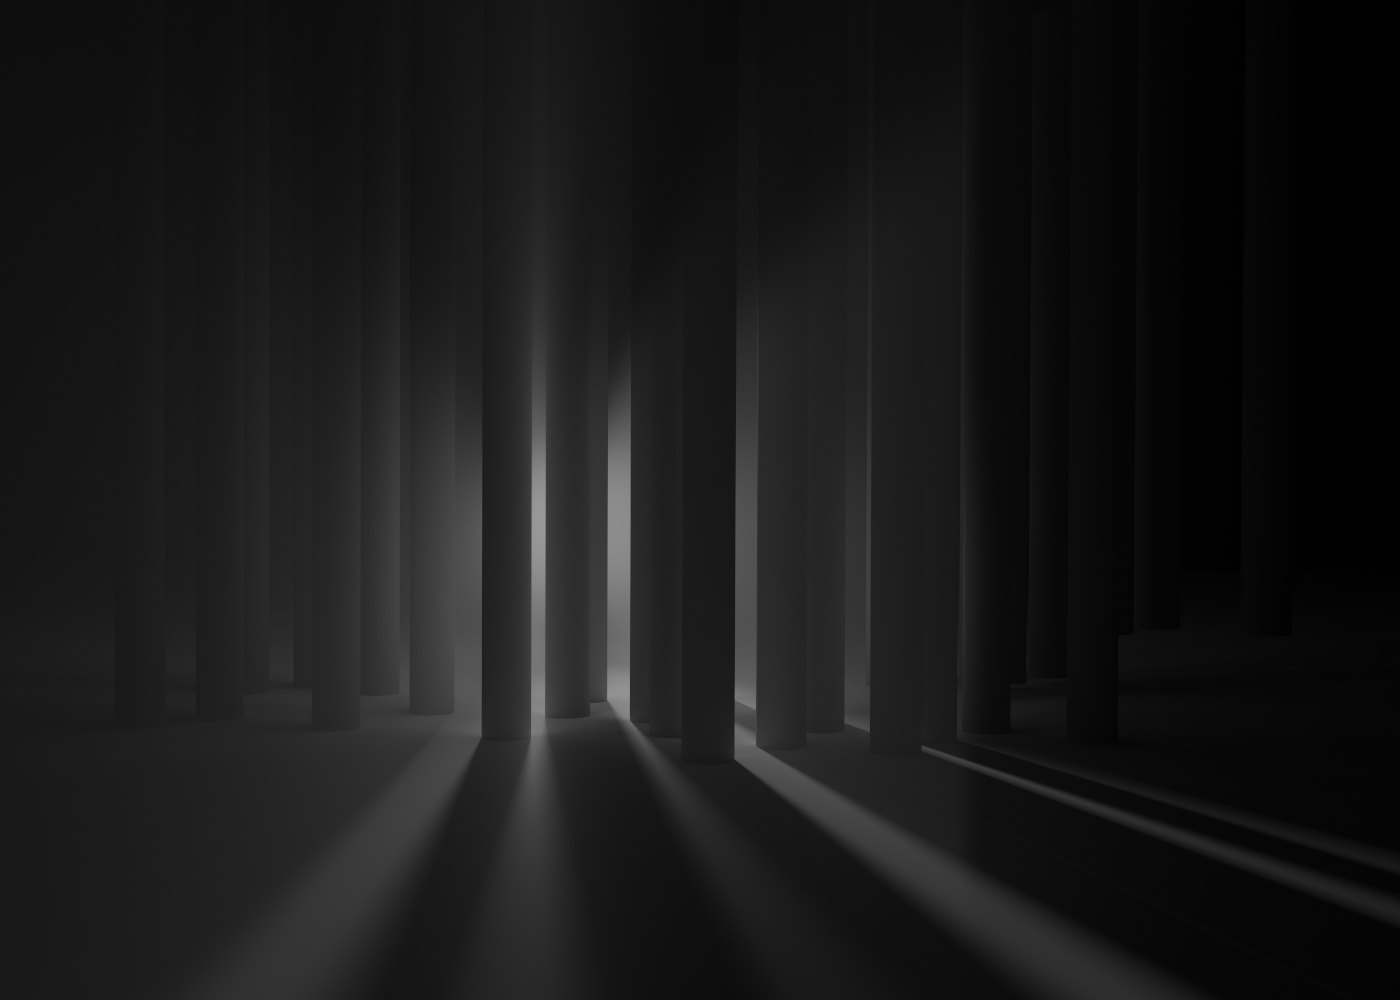 Abstract scenic 3D art, raytracing, 2020: Many cylindrical pillars stand in darkness in front of the viewer and block the view of a large illuminated spot behind them.